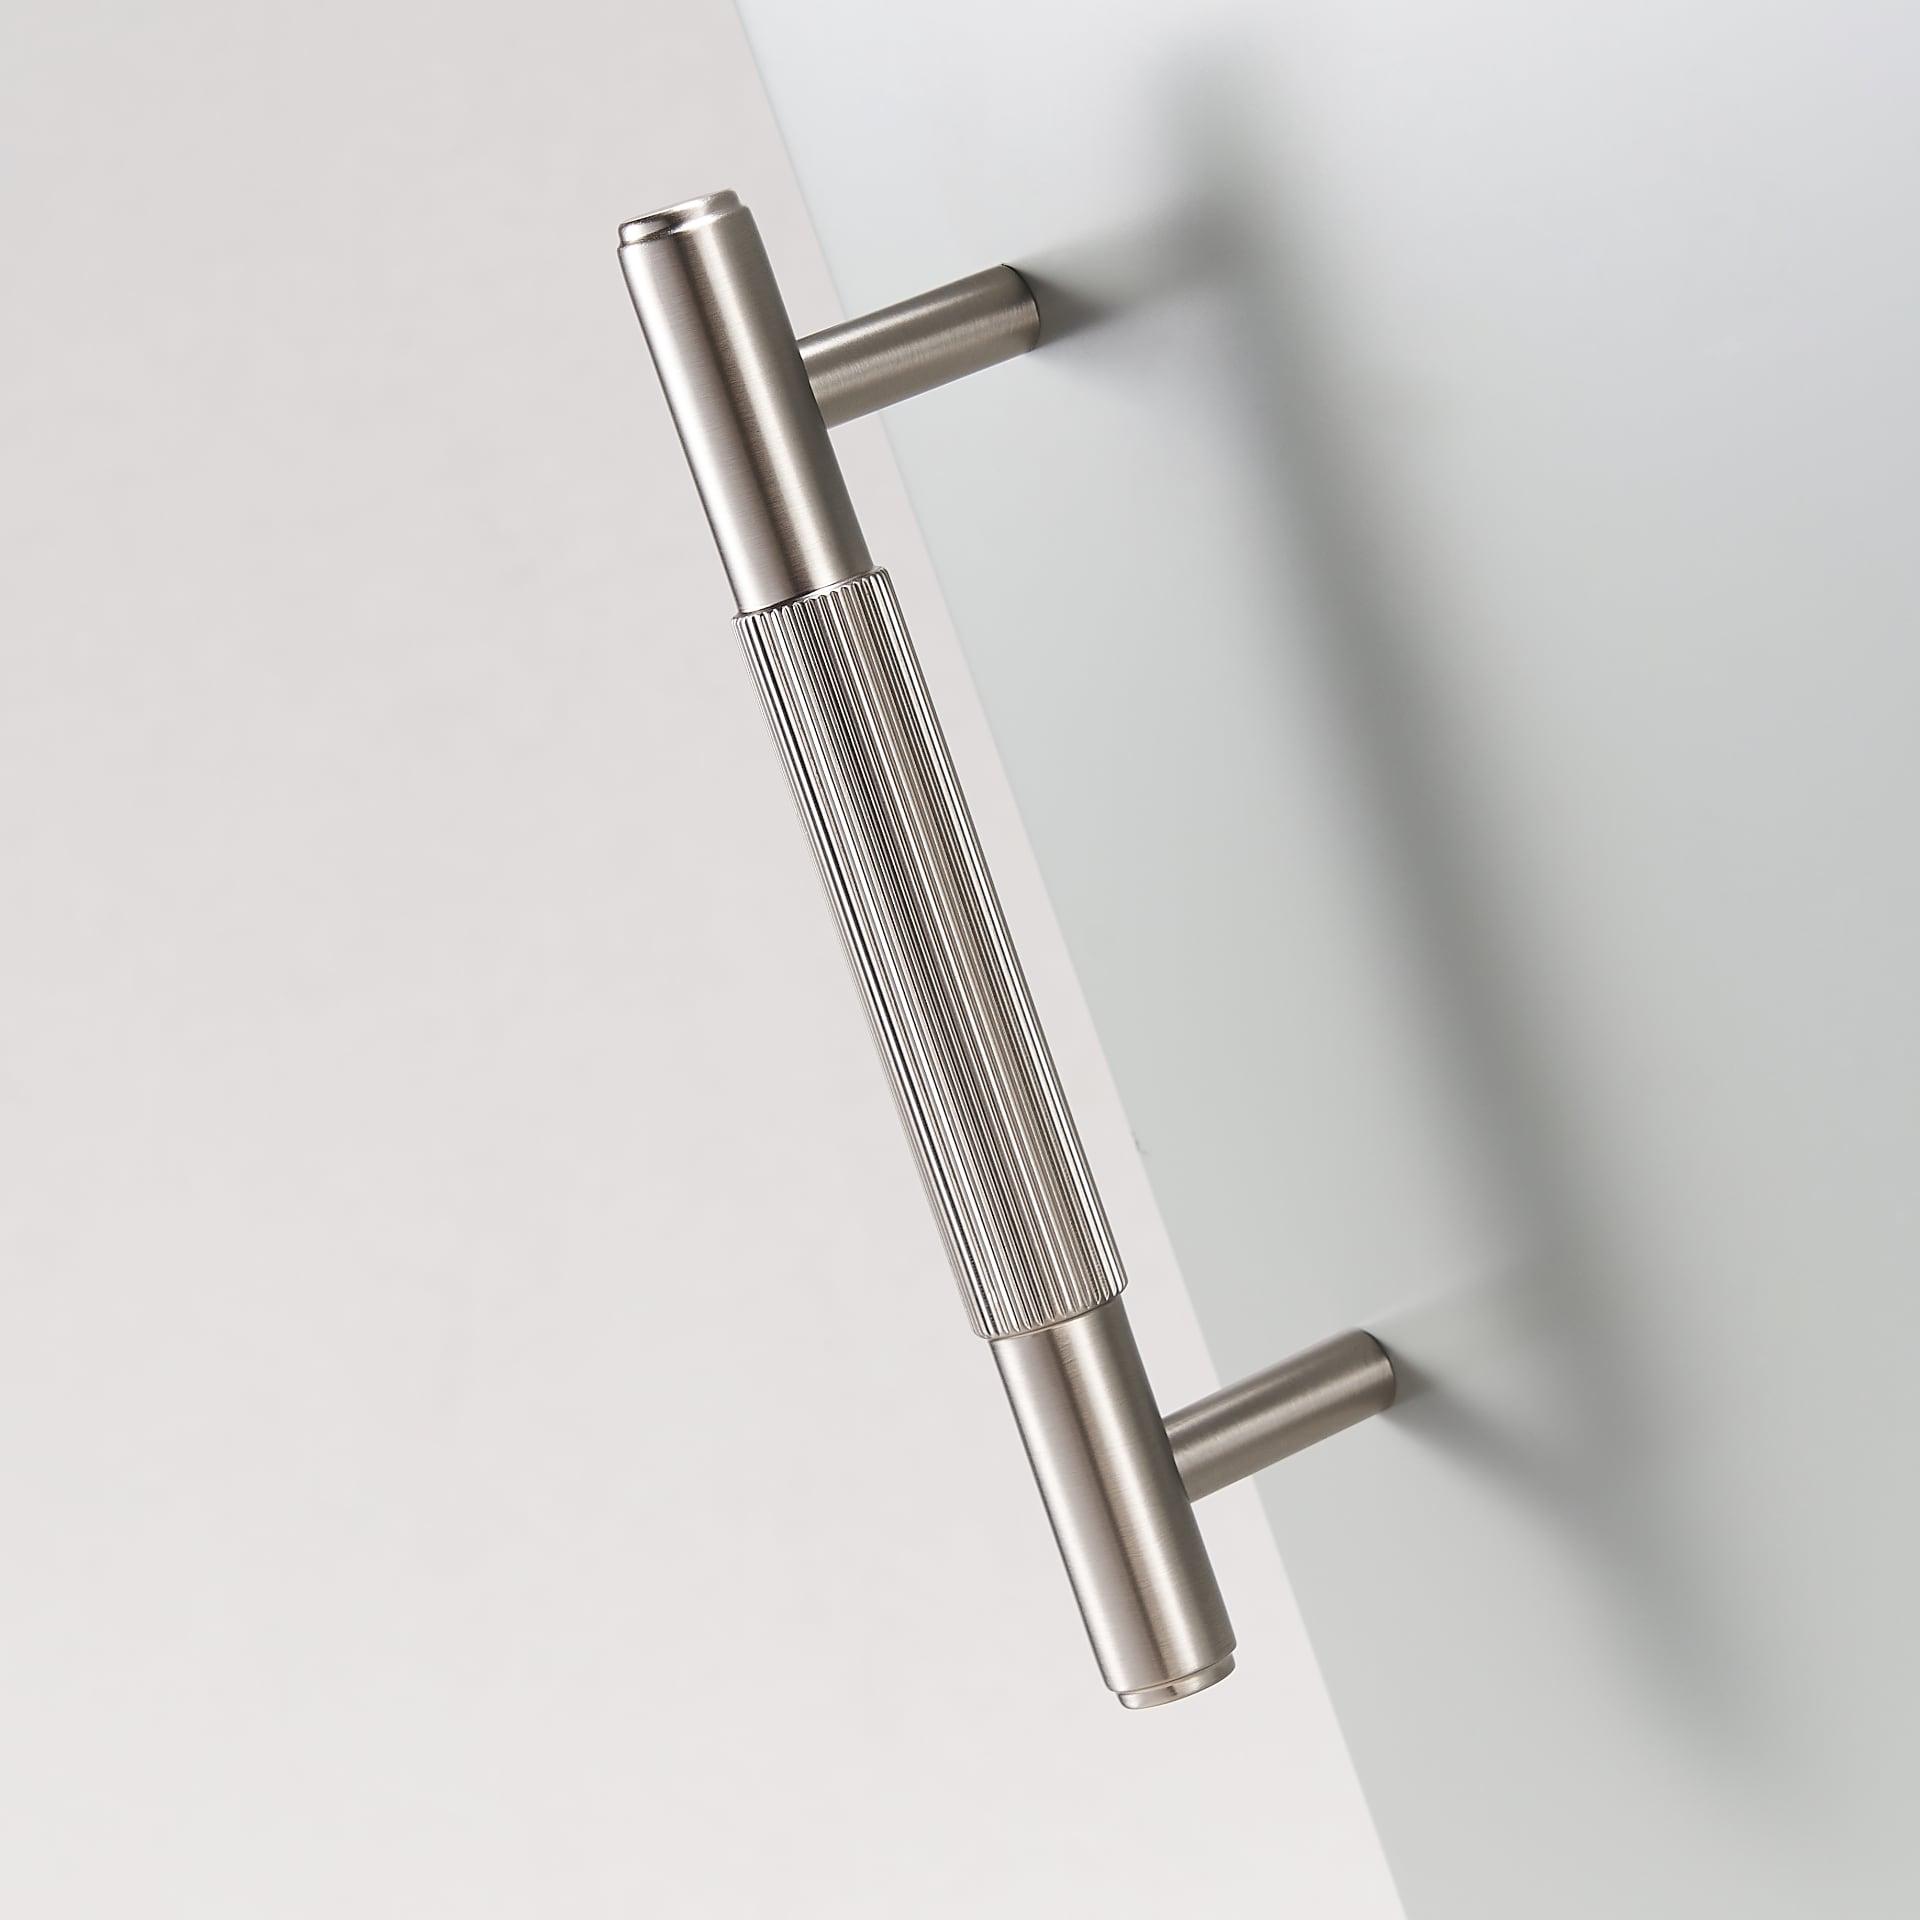 MARBELLA / SOLID BRASS HANDLES - Handle Shop Couture 